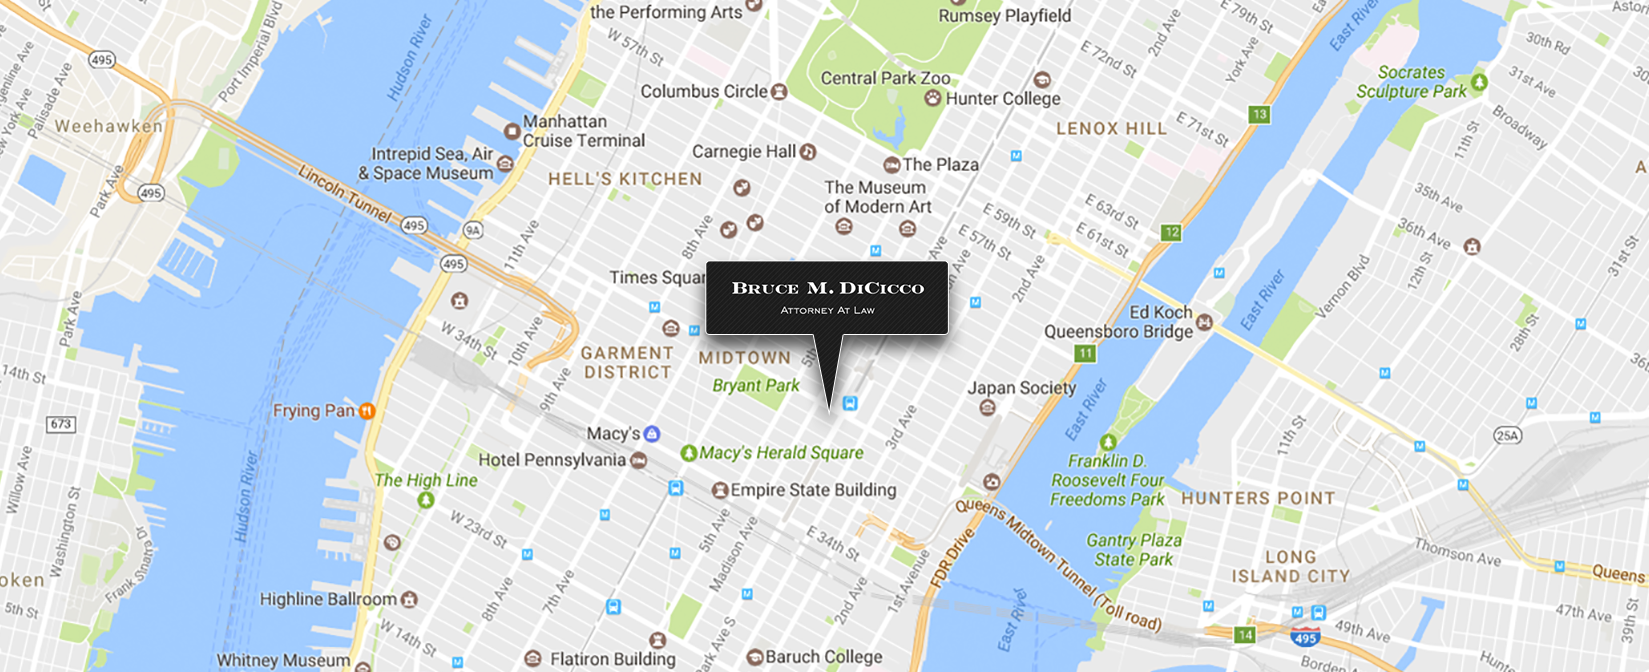 Map to DiCicco Law in New York City, NY